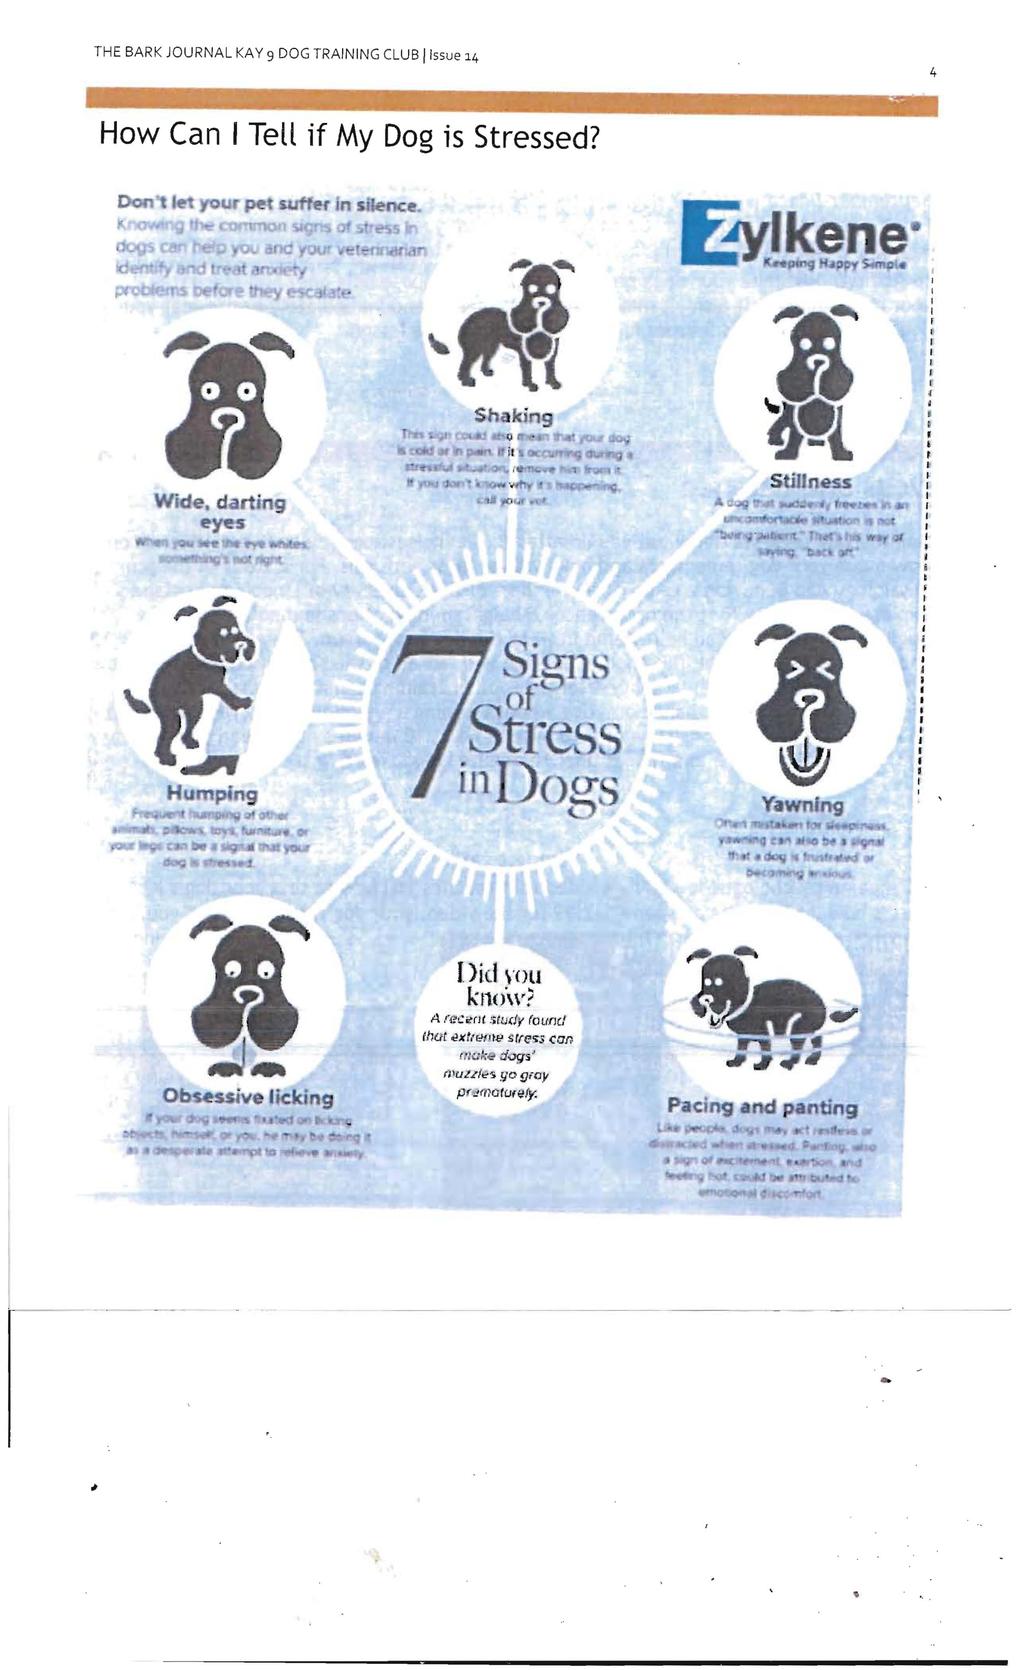 THE BAR K JOURNAL KAY 9 DOG TRAINING CLUB Ilssue].4 4 How Can I Tell if My Dog is Stressed?